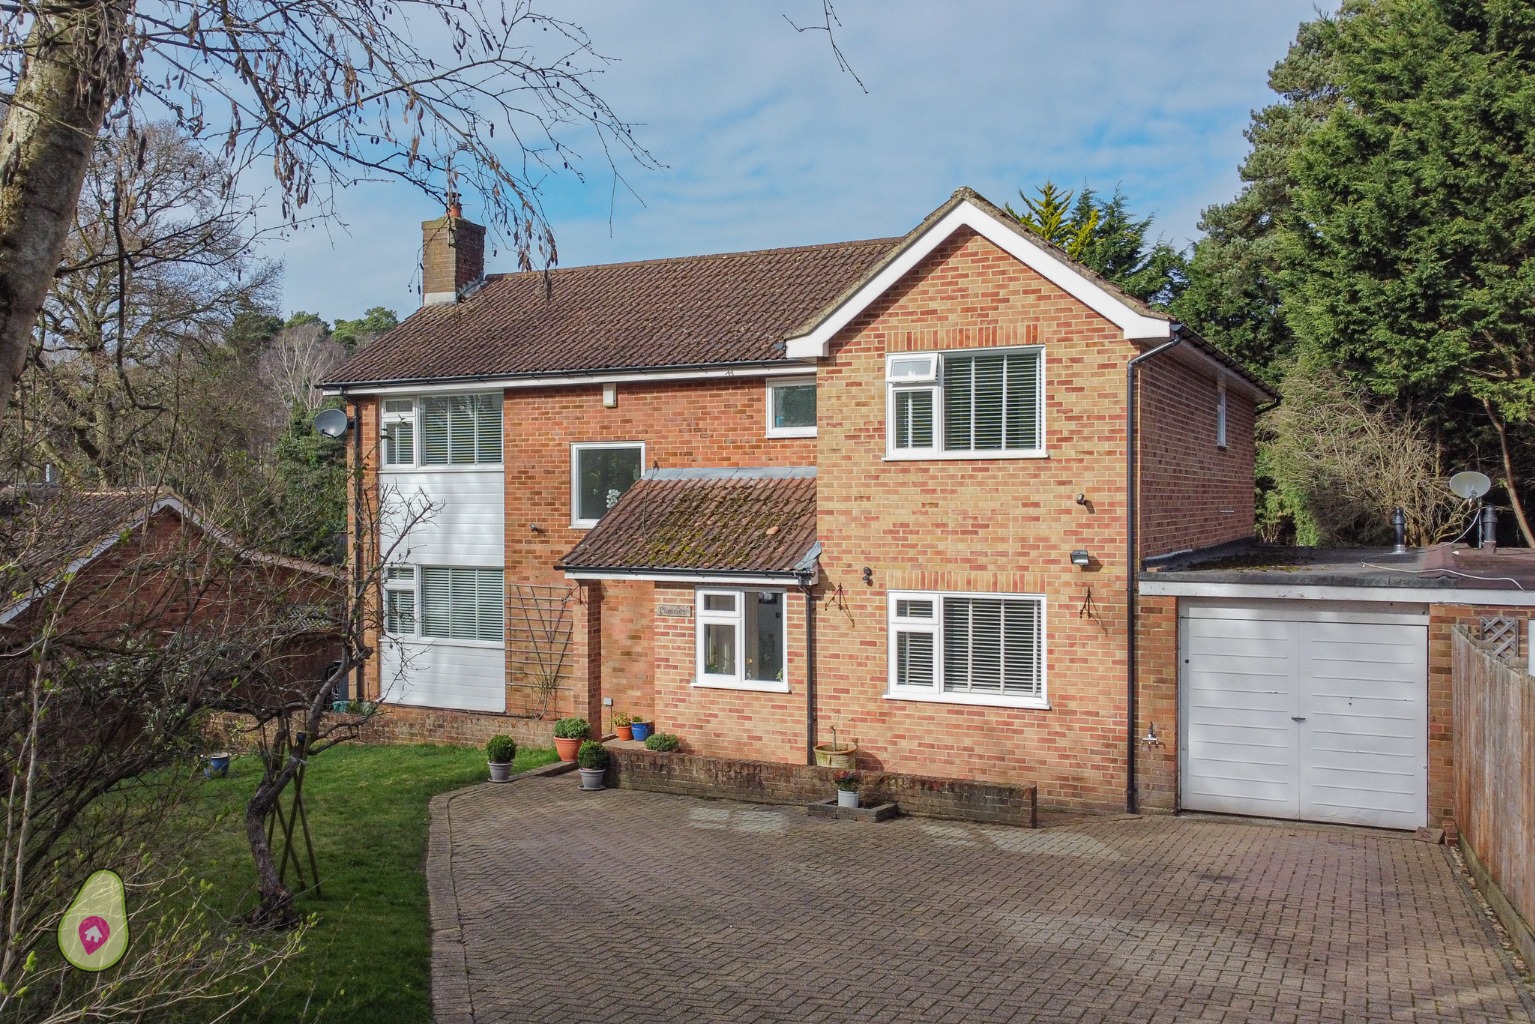 5 bed link detached house for sale in Roundway, Camberley, GU15